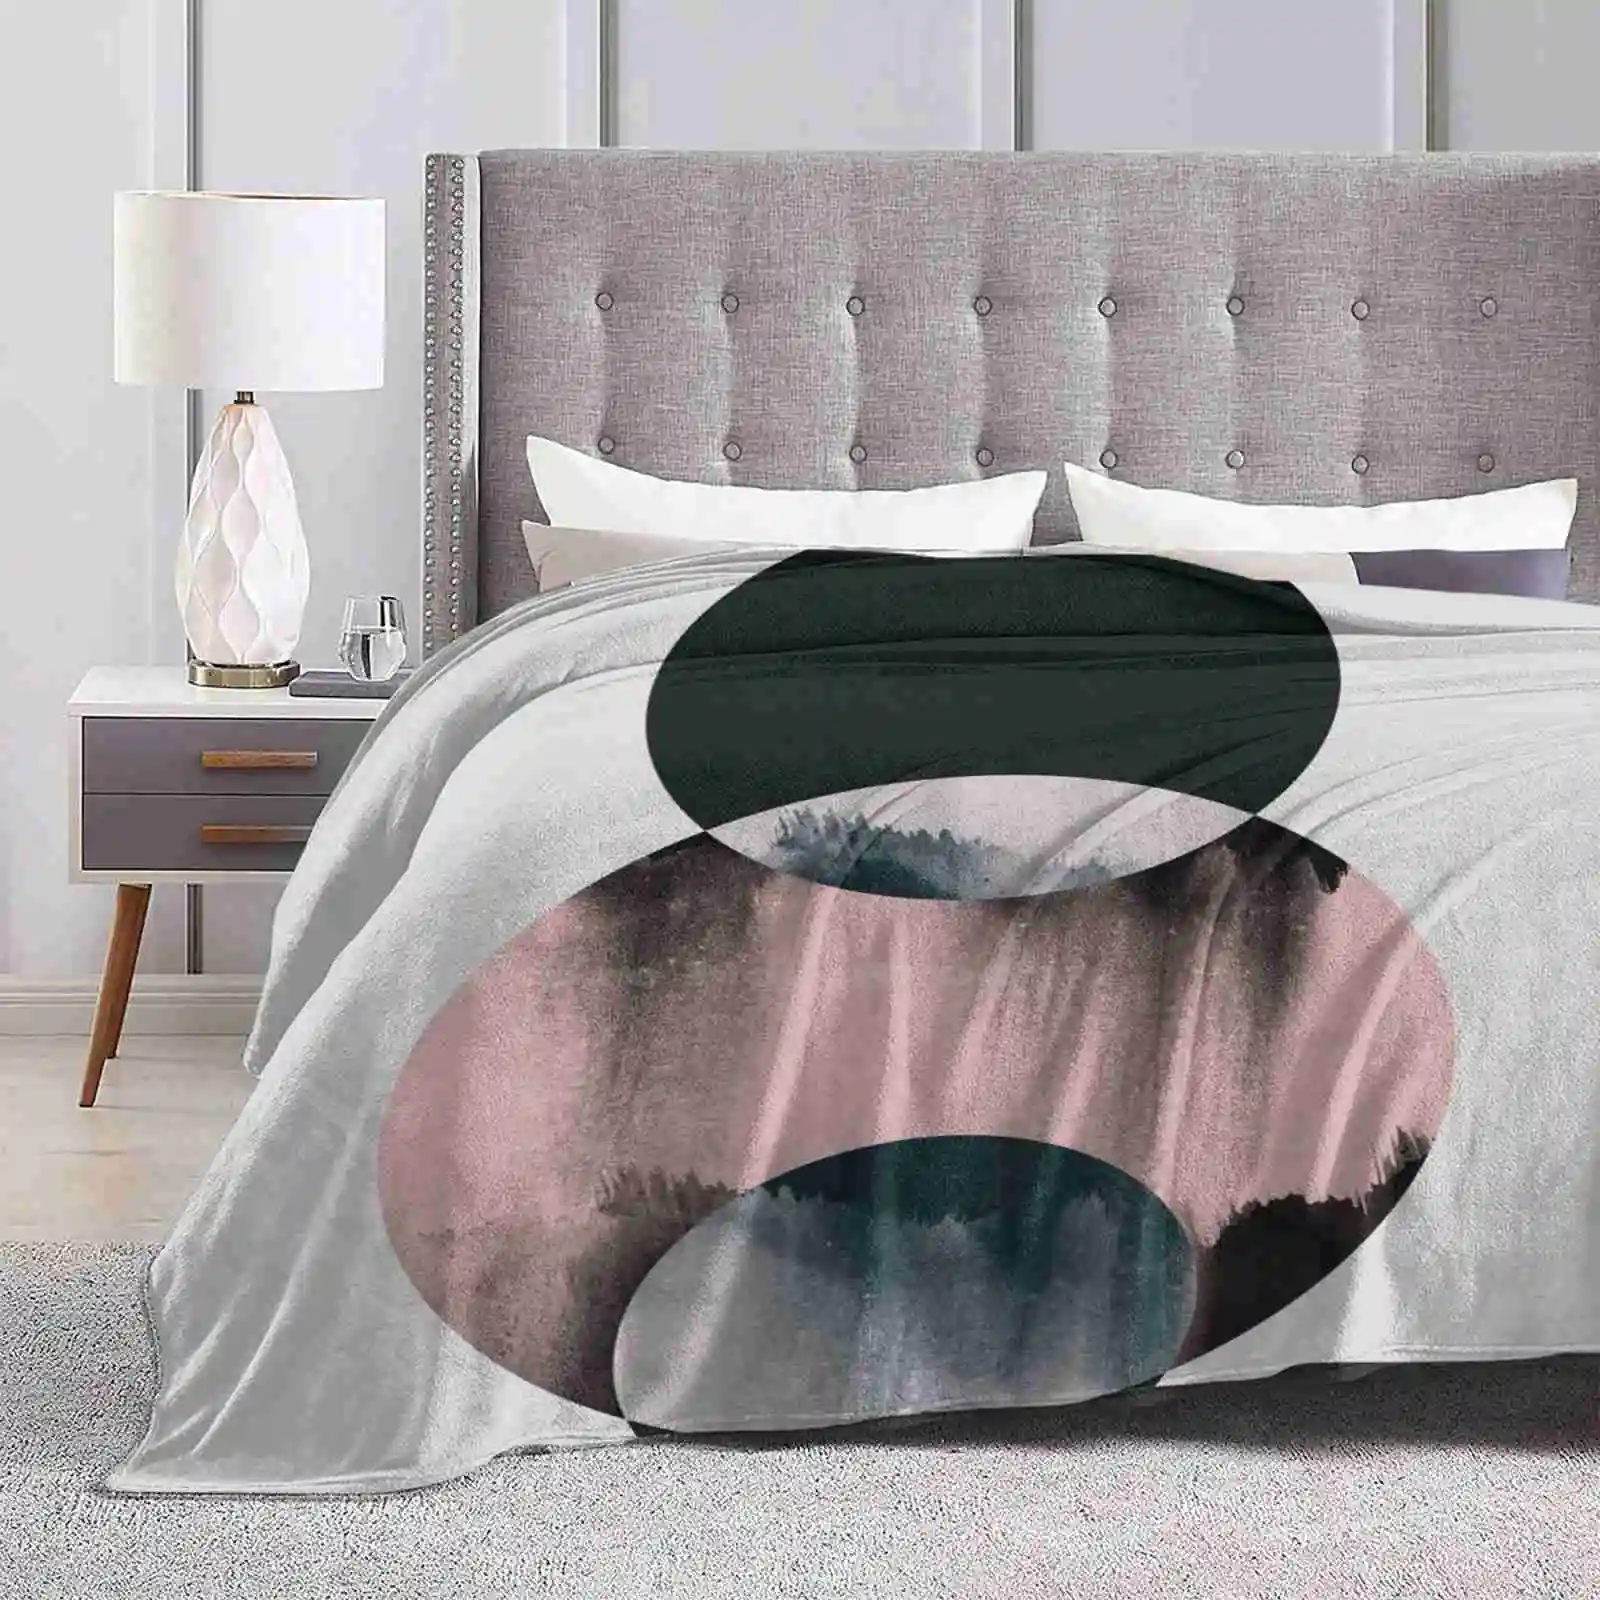 

Minimalism 14 Hot Sale Printing High Qiality Warm Flannel Blanket Minimalism Abstract Graphic Circles Geometry Geometric